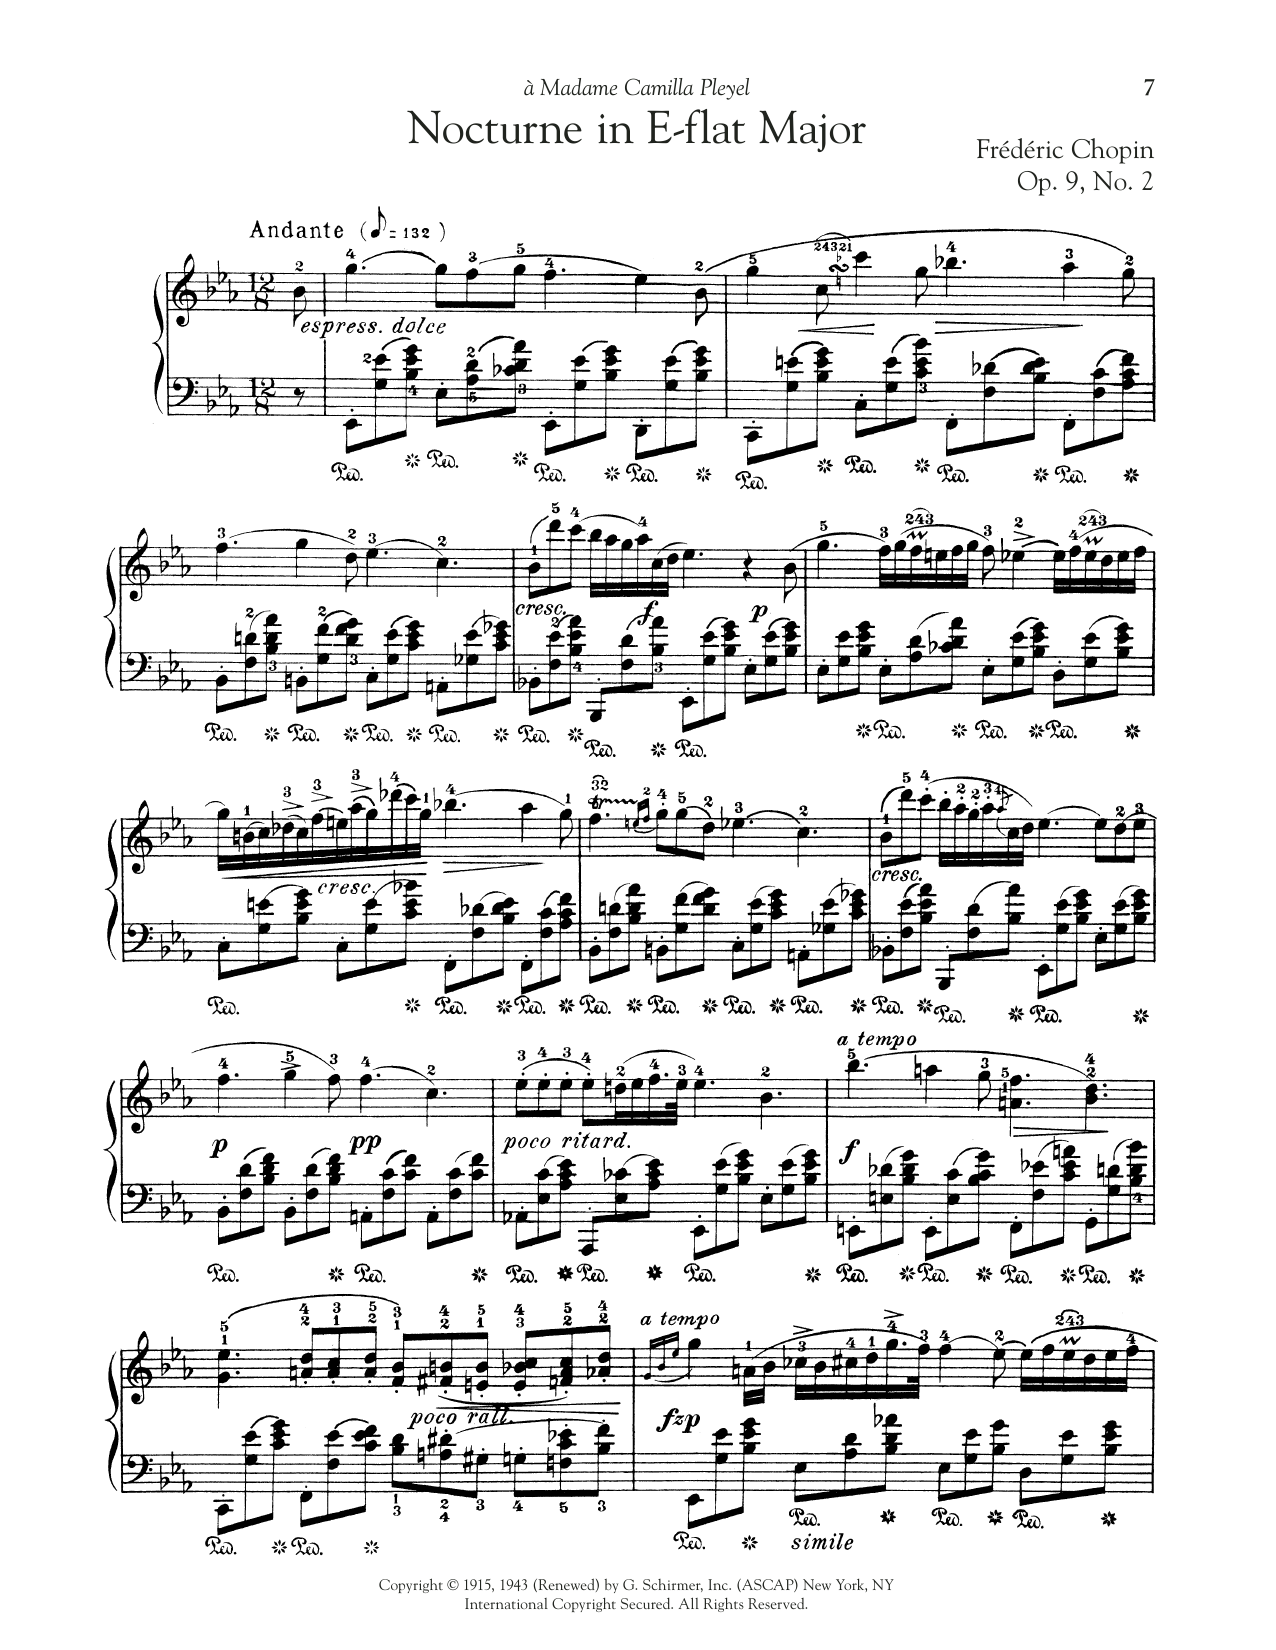 Download Frederic Chopin Nocturne, Op. 9, No. 2 Sheet Music